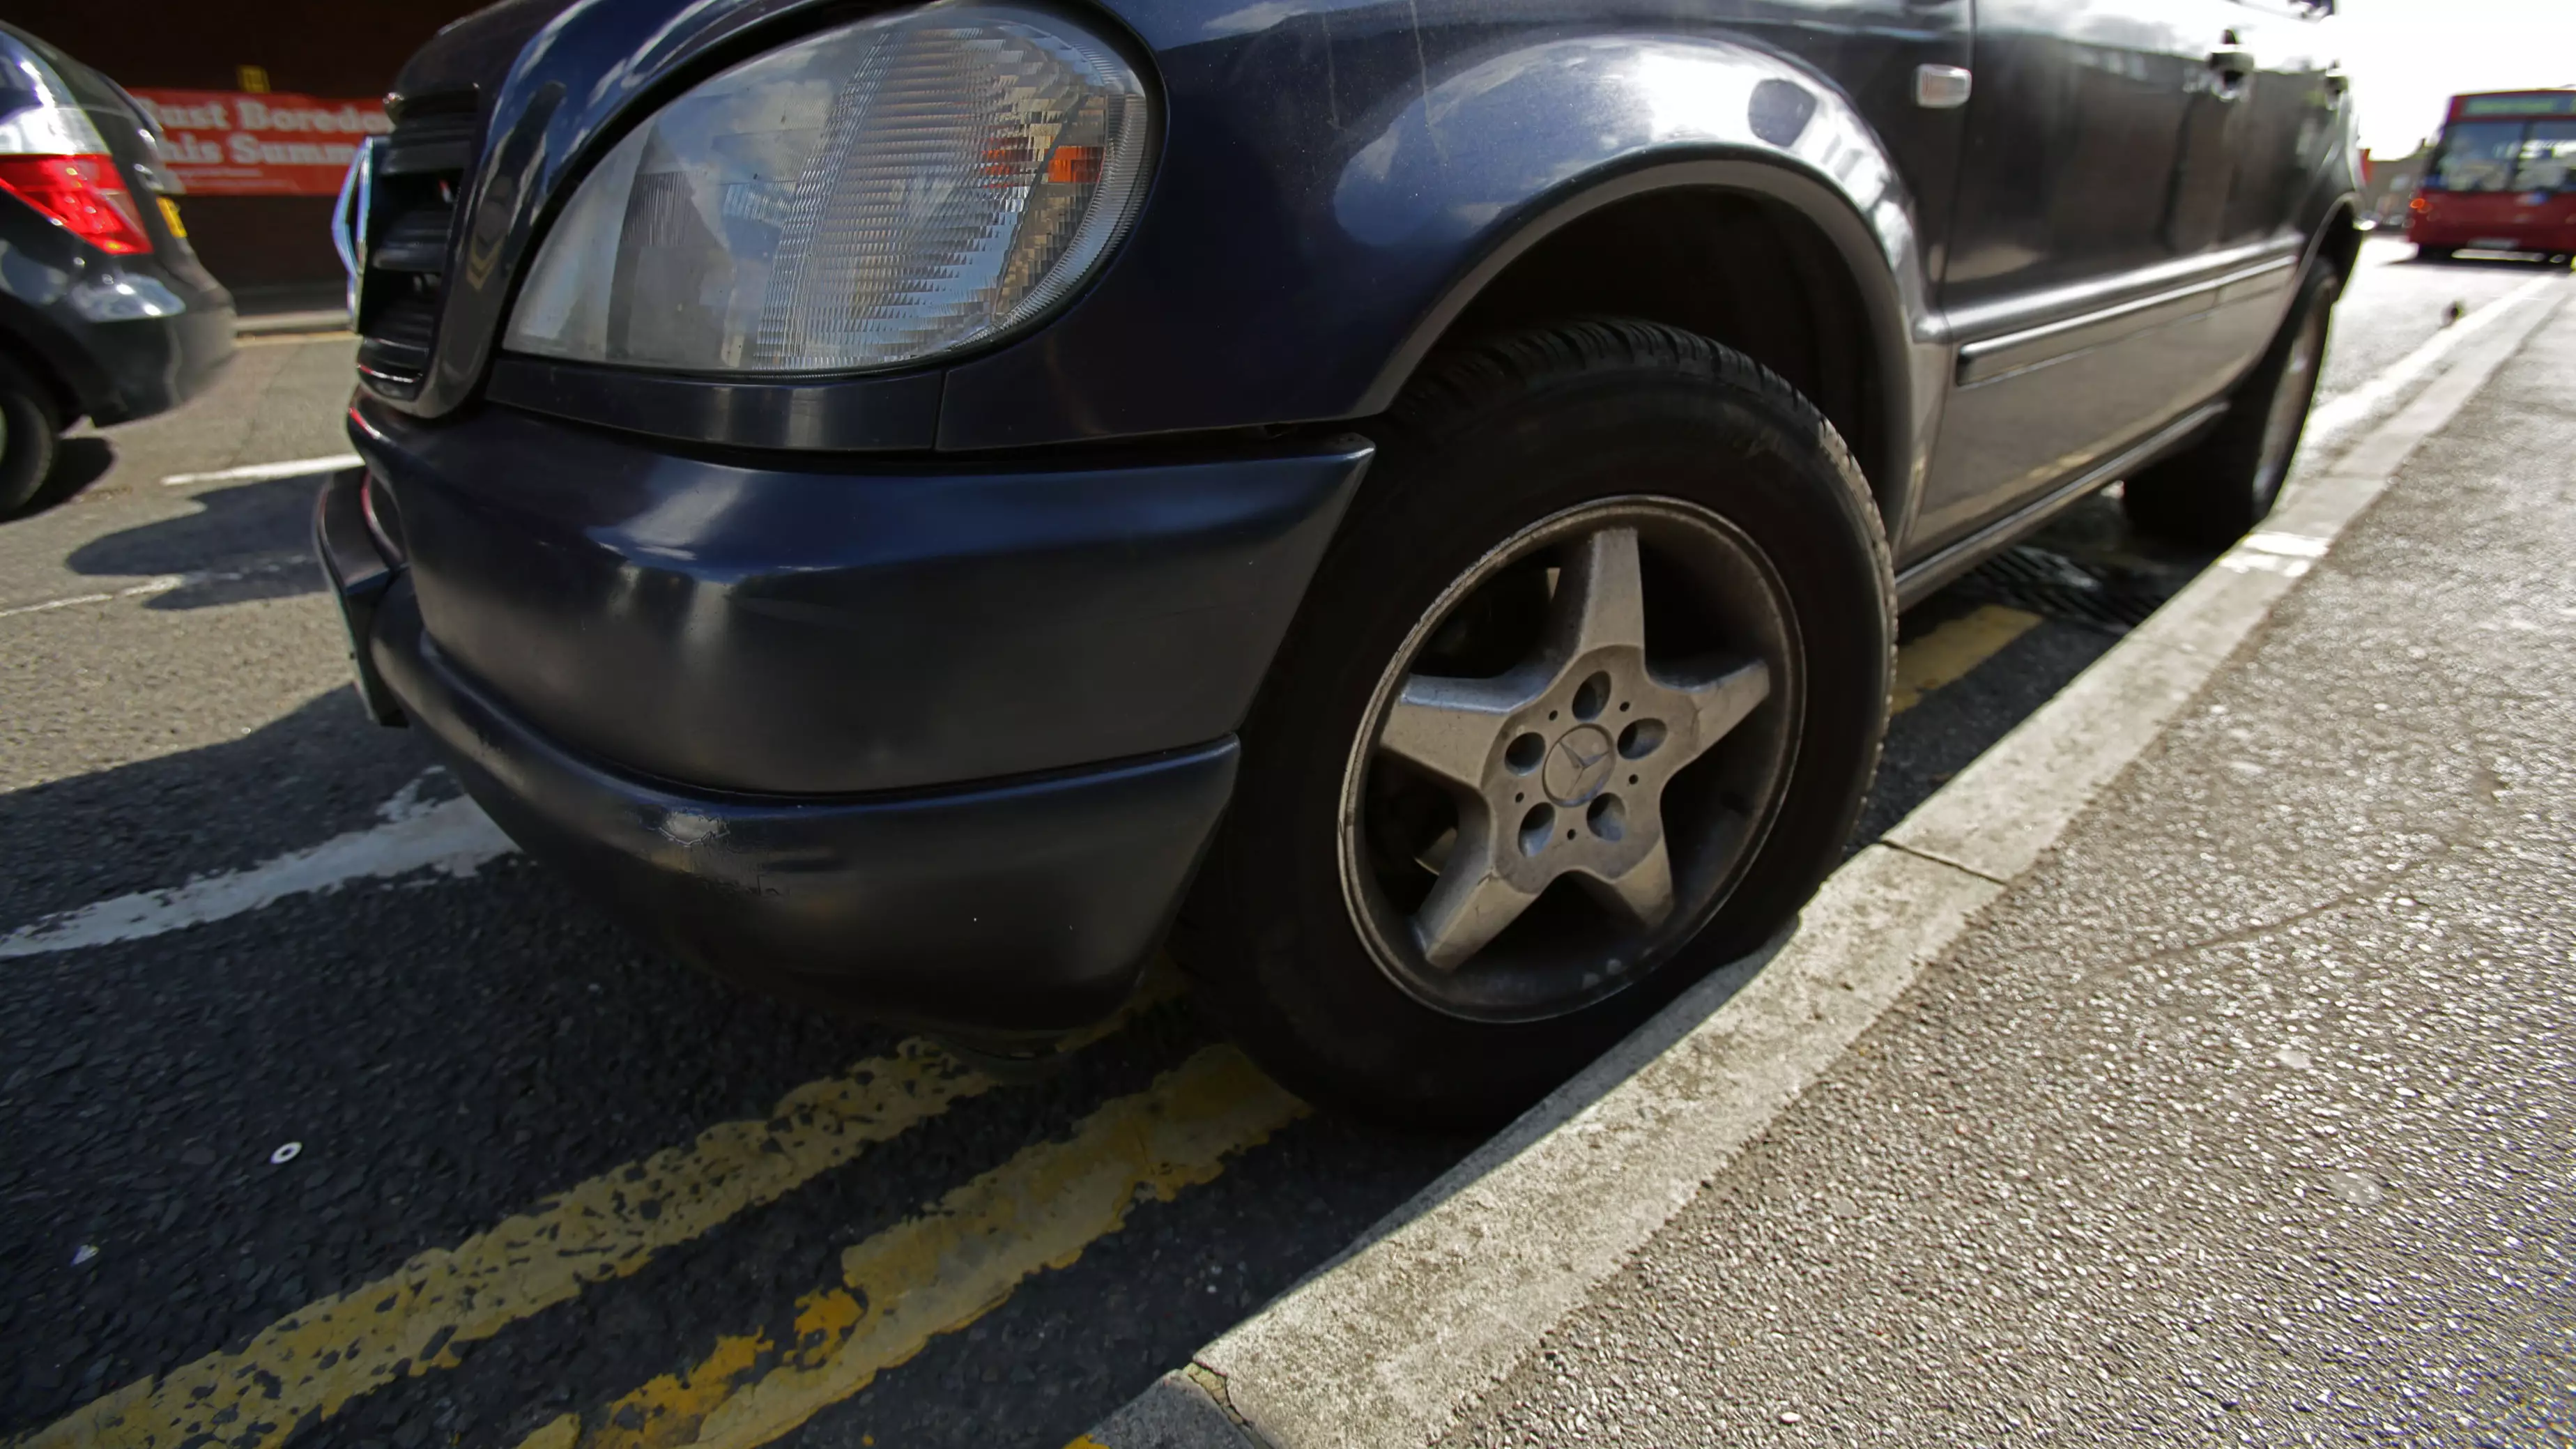 Driver Outraged After Getting Parking Fine Despite 'Not Touching' Yellow Lines